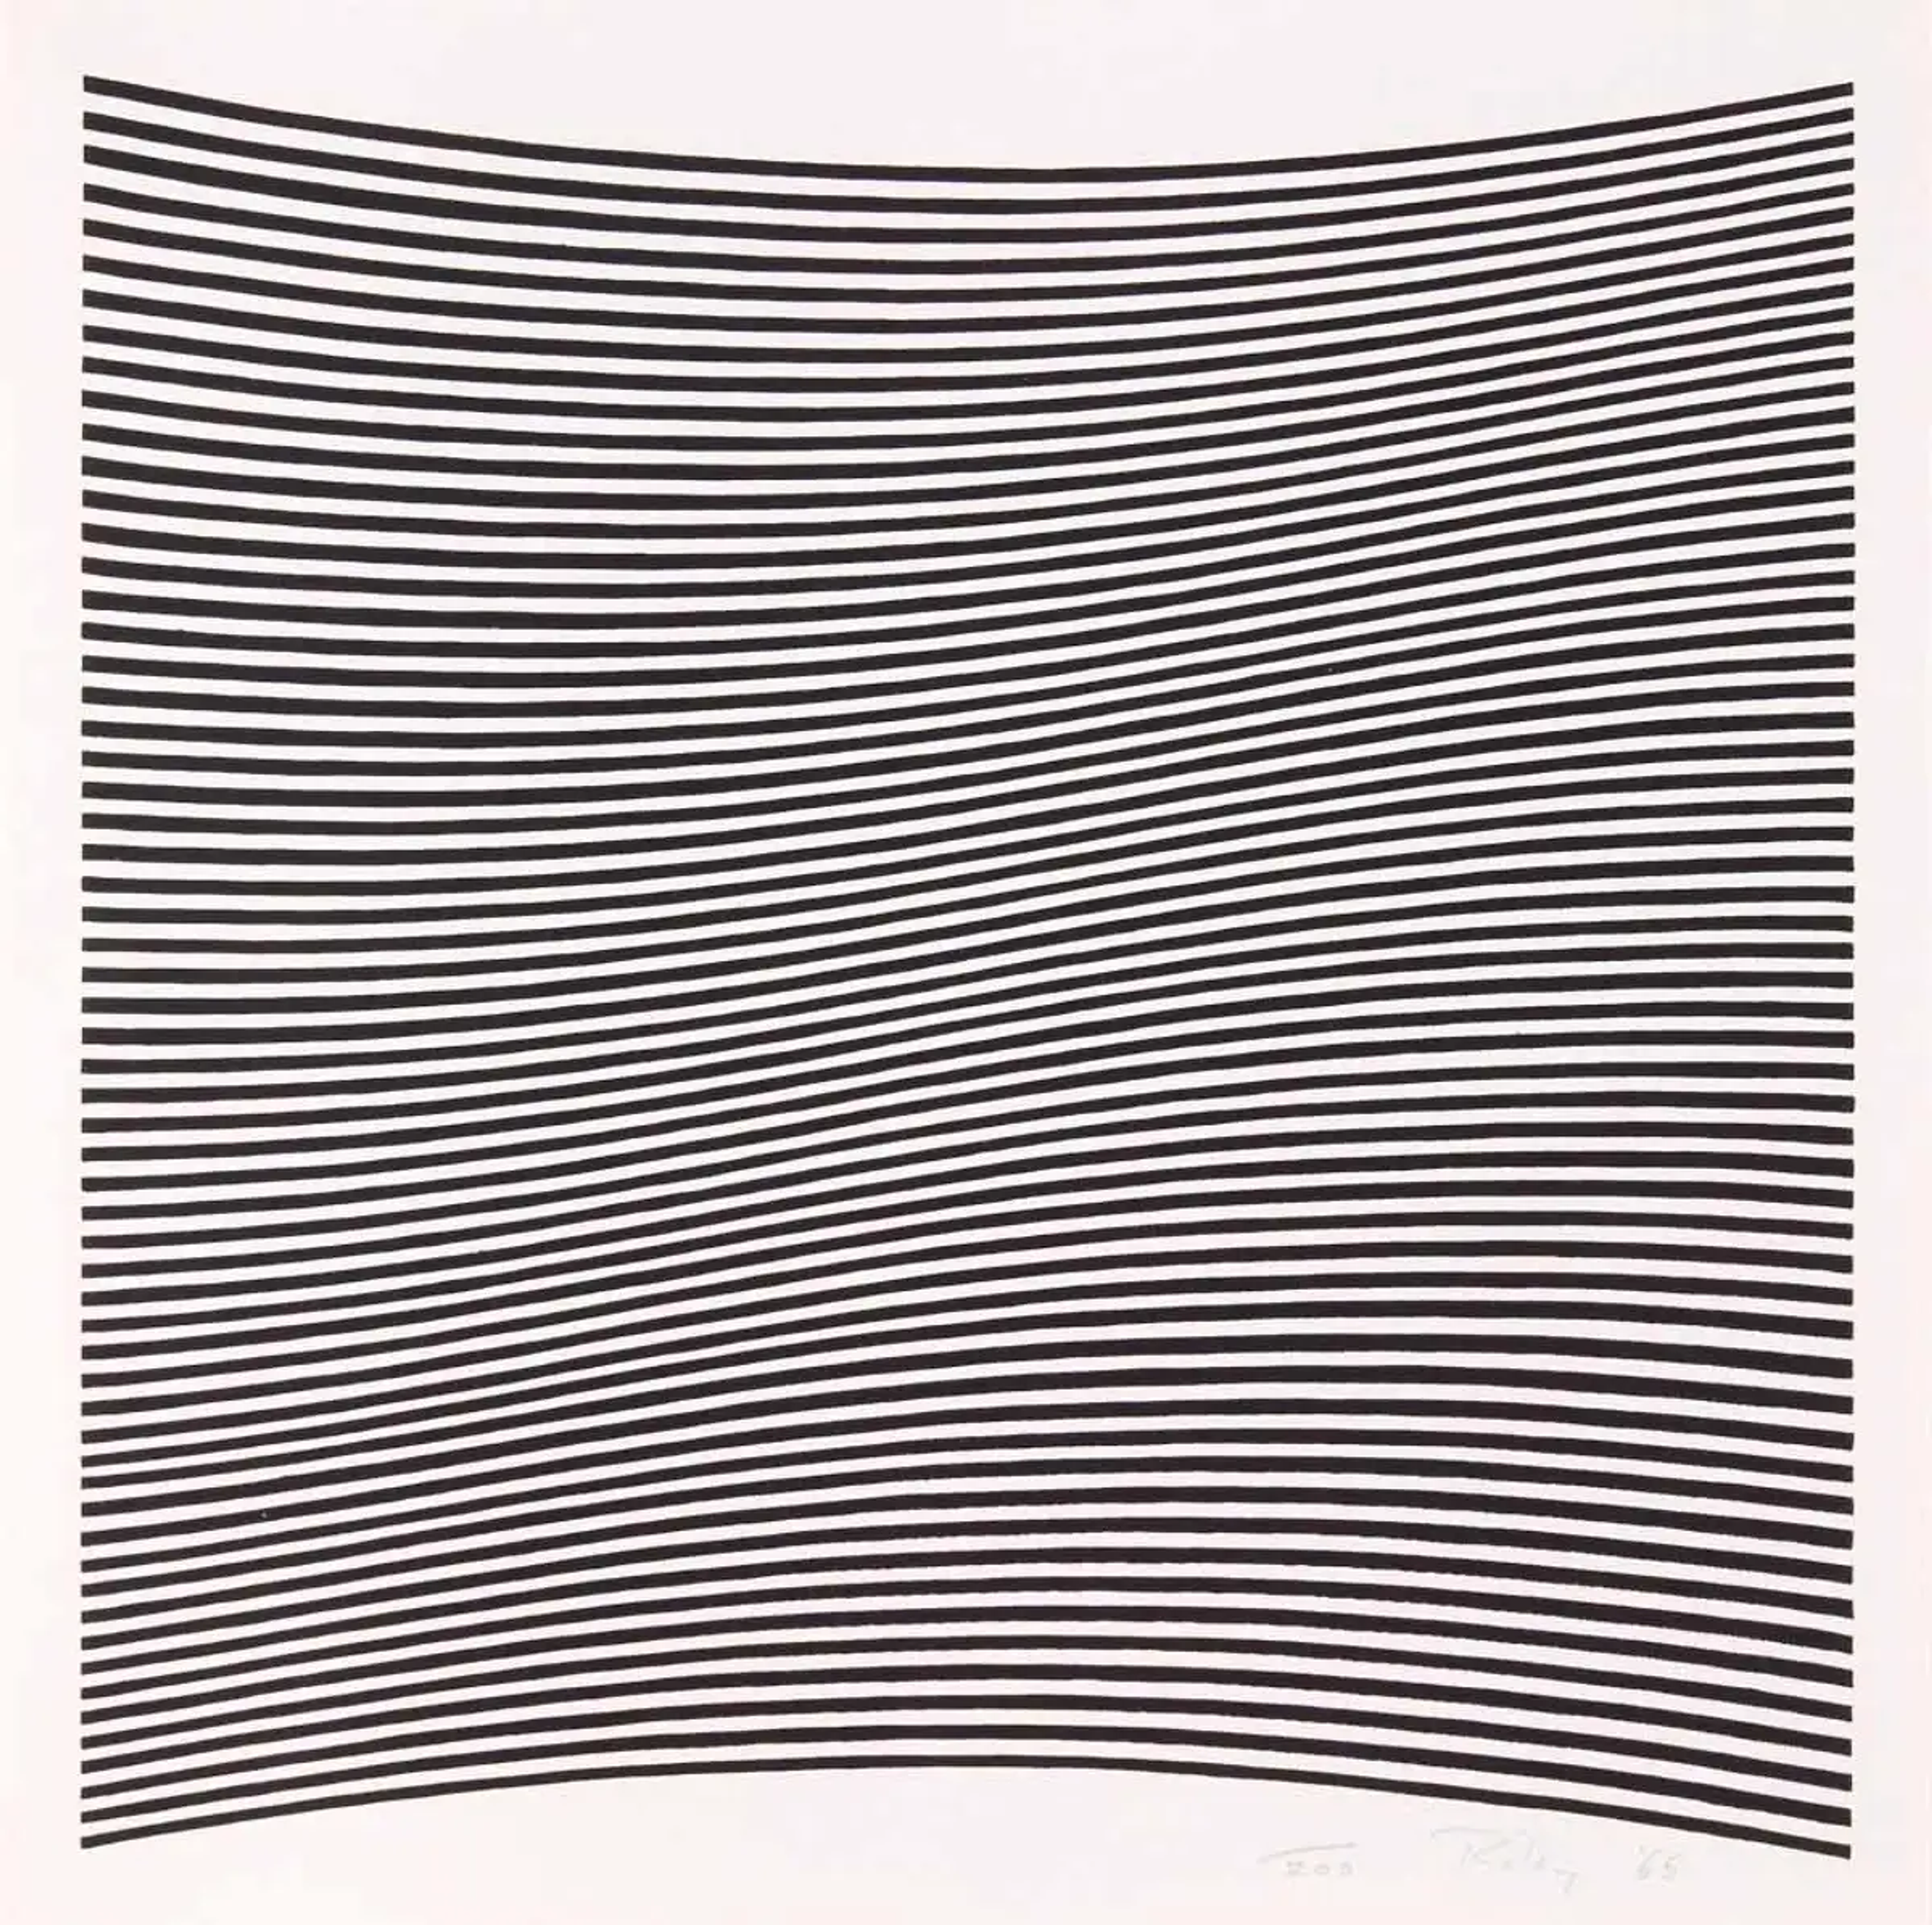 La Lune En Rodage is a black and white screen print executed by British artist Bridget Riley composed simply of black horizontal lines of equal length, yet, in true Riley fashion, the effects of such simplicity are complex. The lines, as they move from top to bottom, slowly merge from being concave to convex. Consequently, the black lines appear to oscillate, like waves, across the surface of the print.